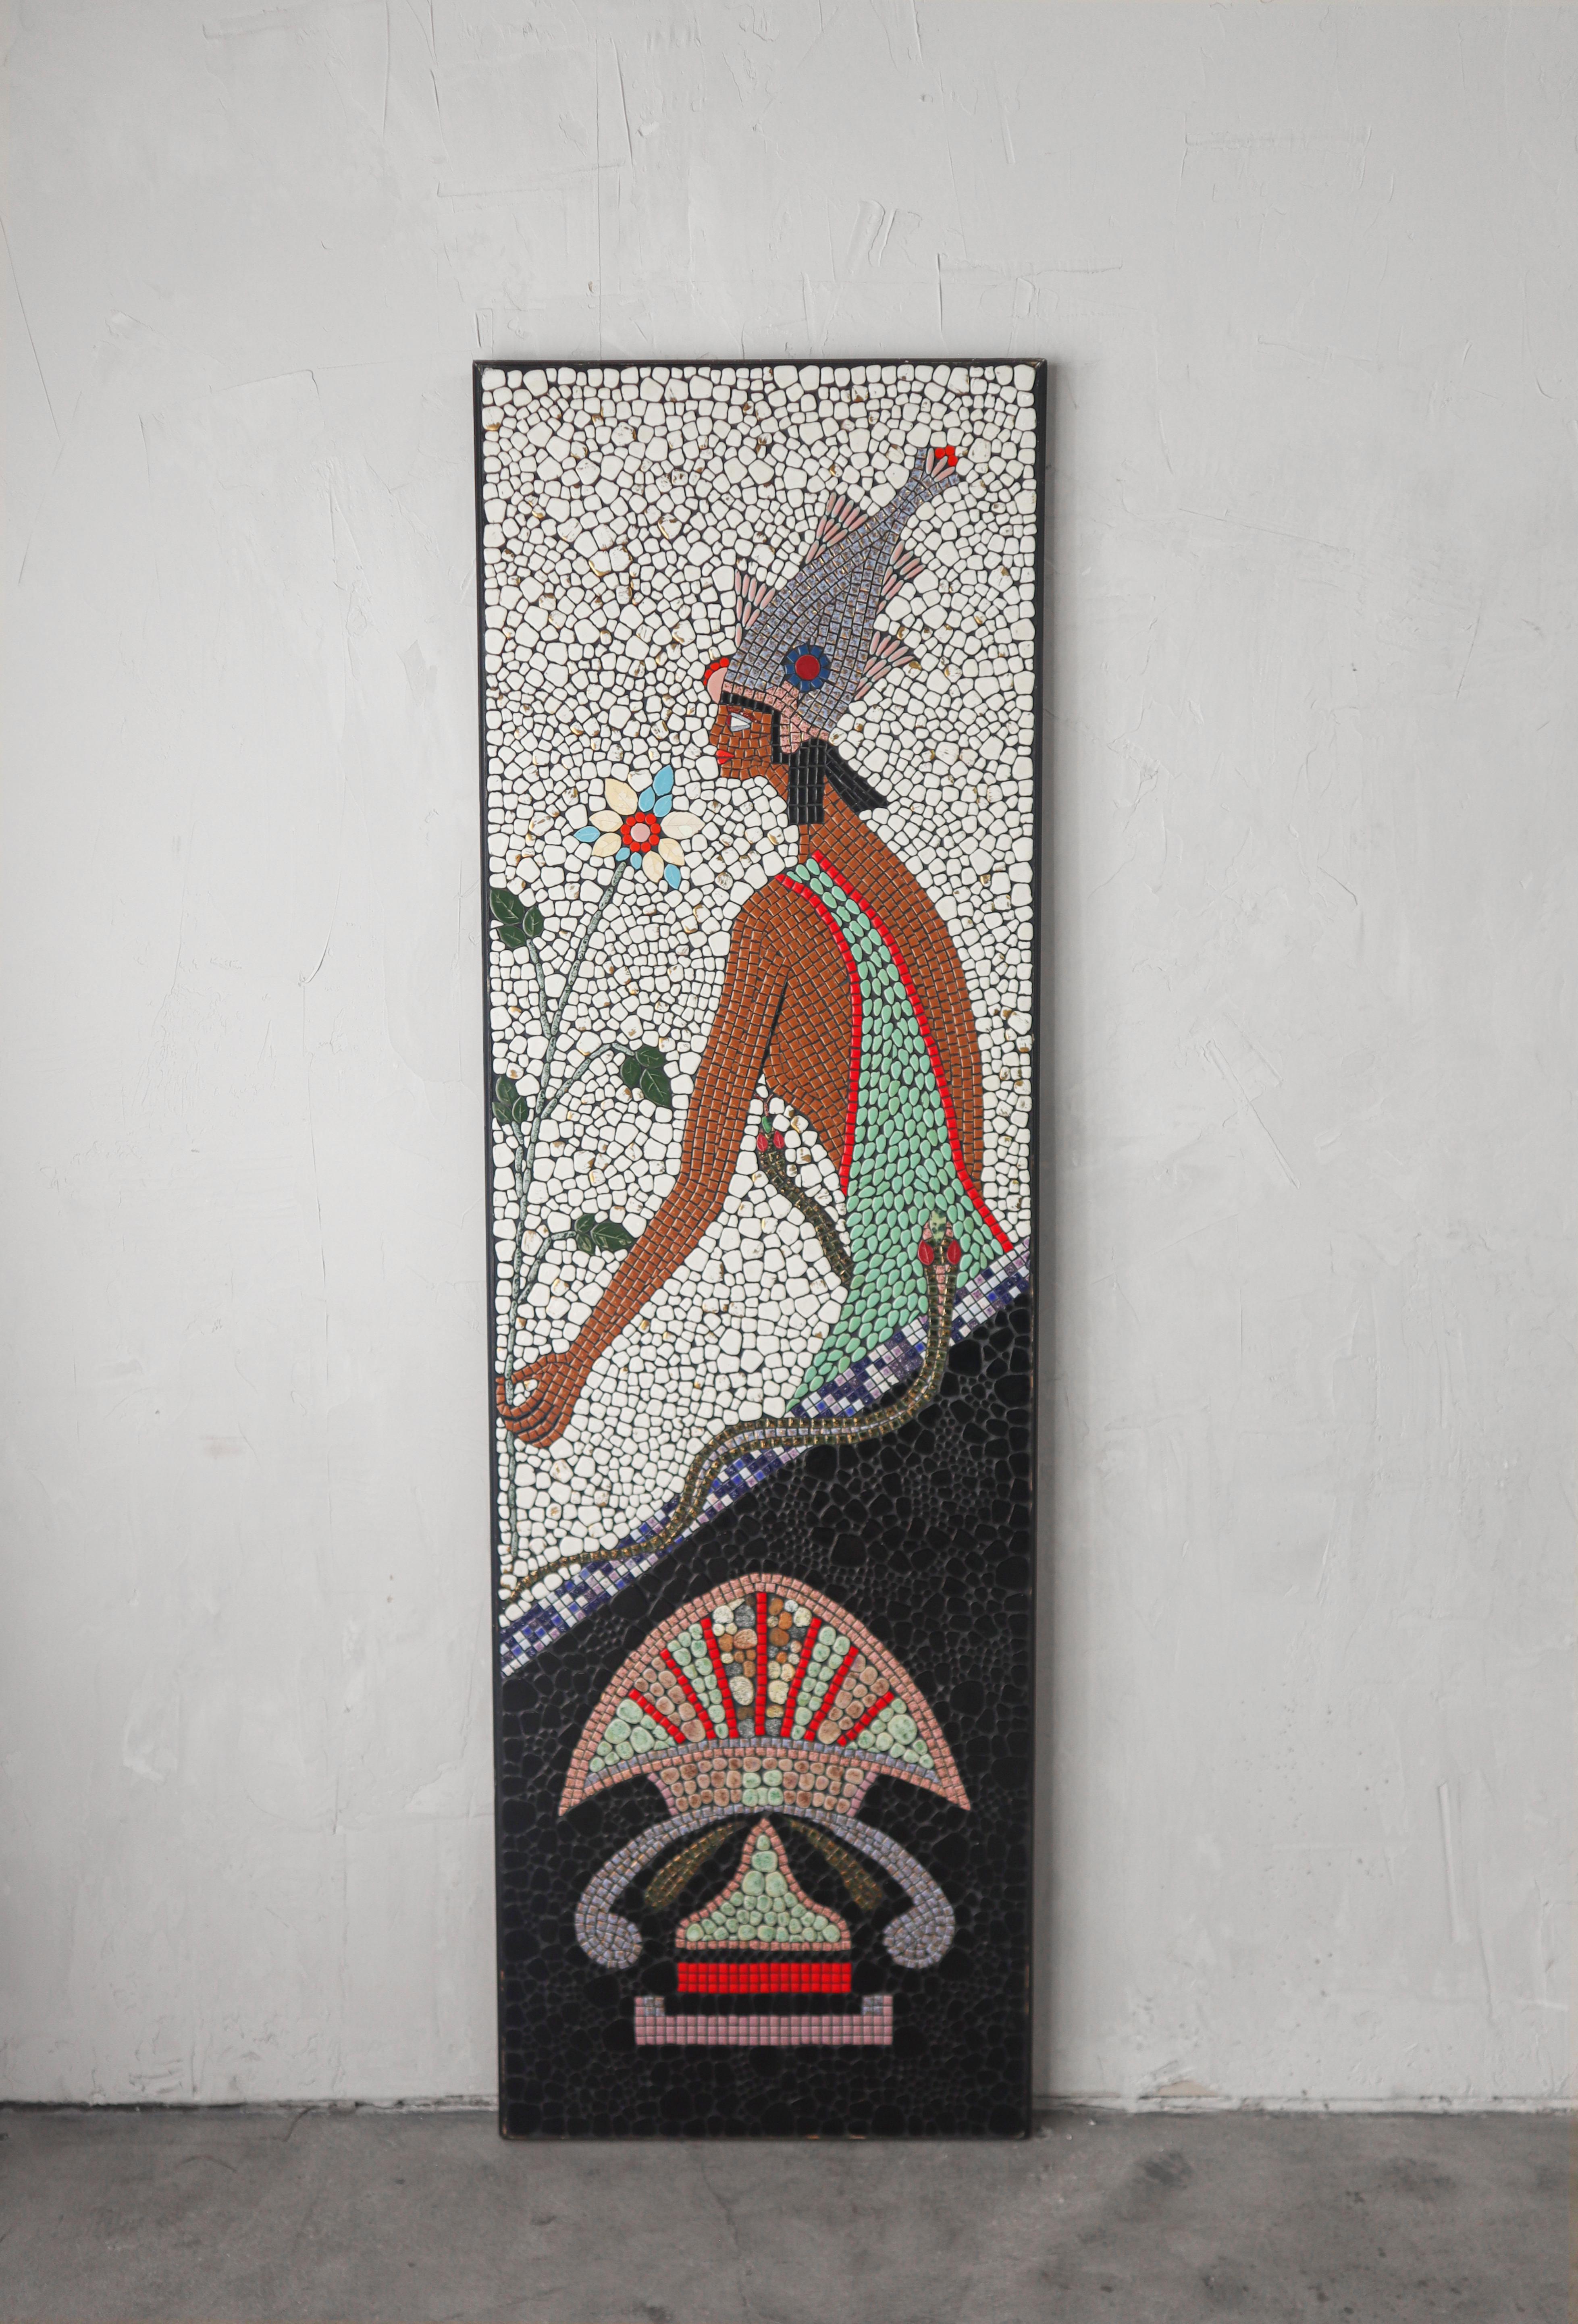 Unique mid-century mosaic depicting and Egyptian Goddess, possibly Hatmehyt, the Egyptian Goddess of Fish. 

The mosaic stands 6.5ft tall and is constructed out of rounded pebble like stones in the most gorgeous colors, strategically placed. I